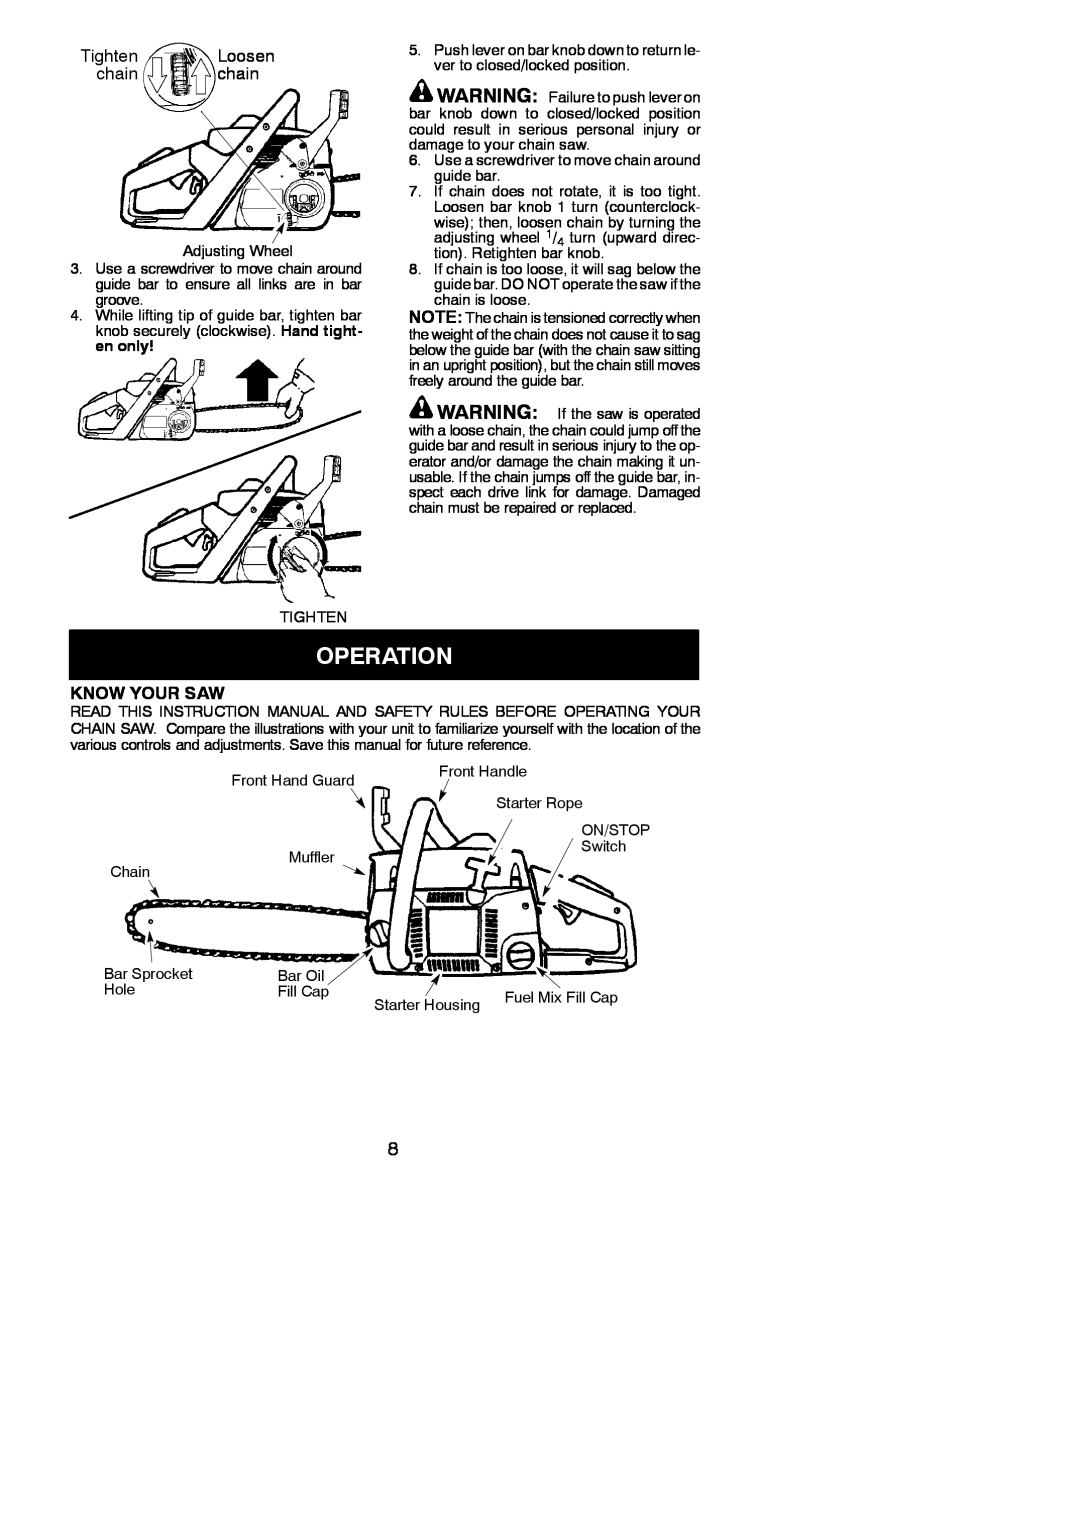 Poulan 545186803 instruction manual Operation, Tighten Loosen chain chain, Know Your Saw 